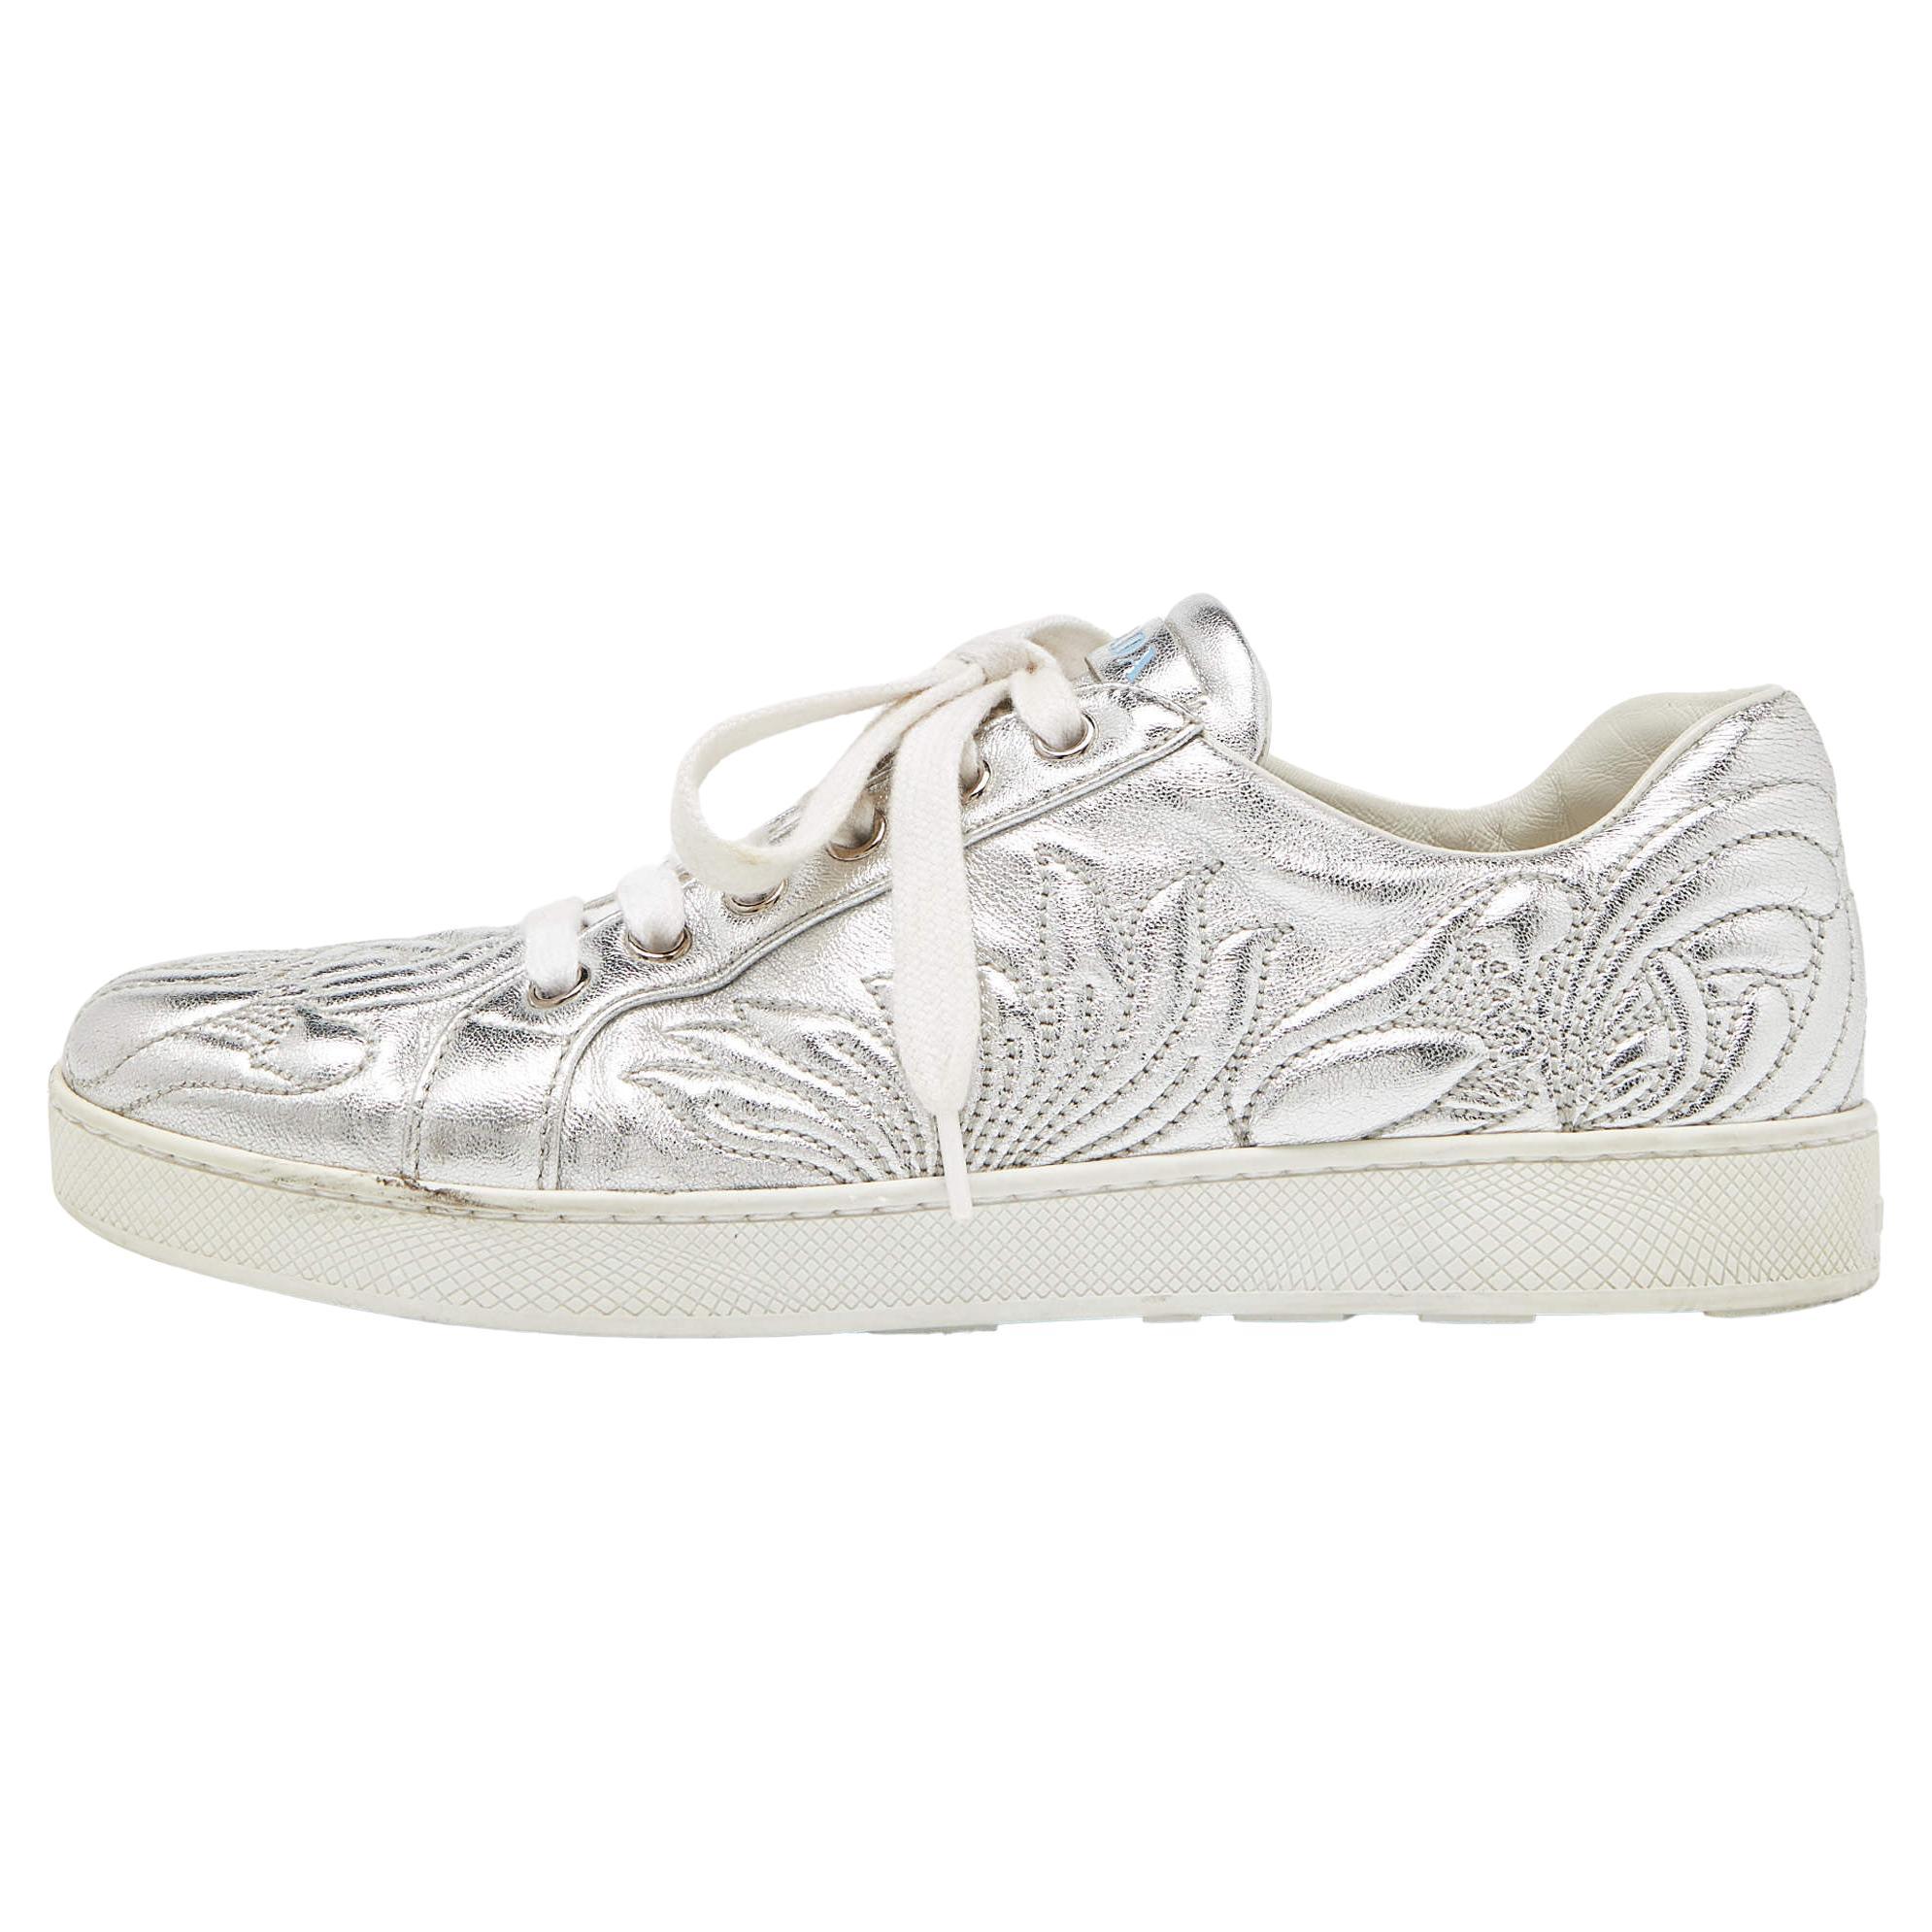 Prada Silver Embroidered Leather Low Top Sneakers Size 38 For Sale